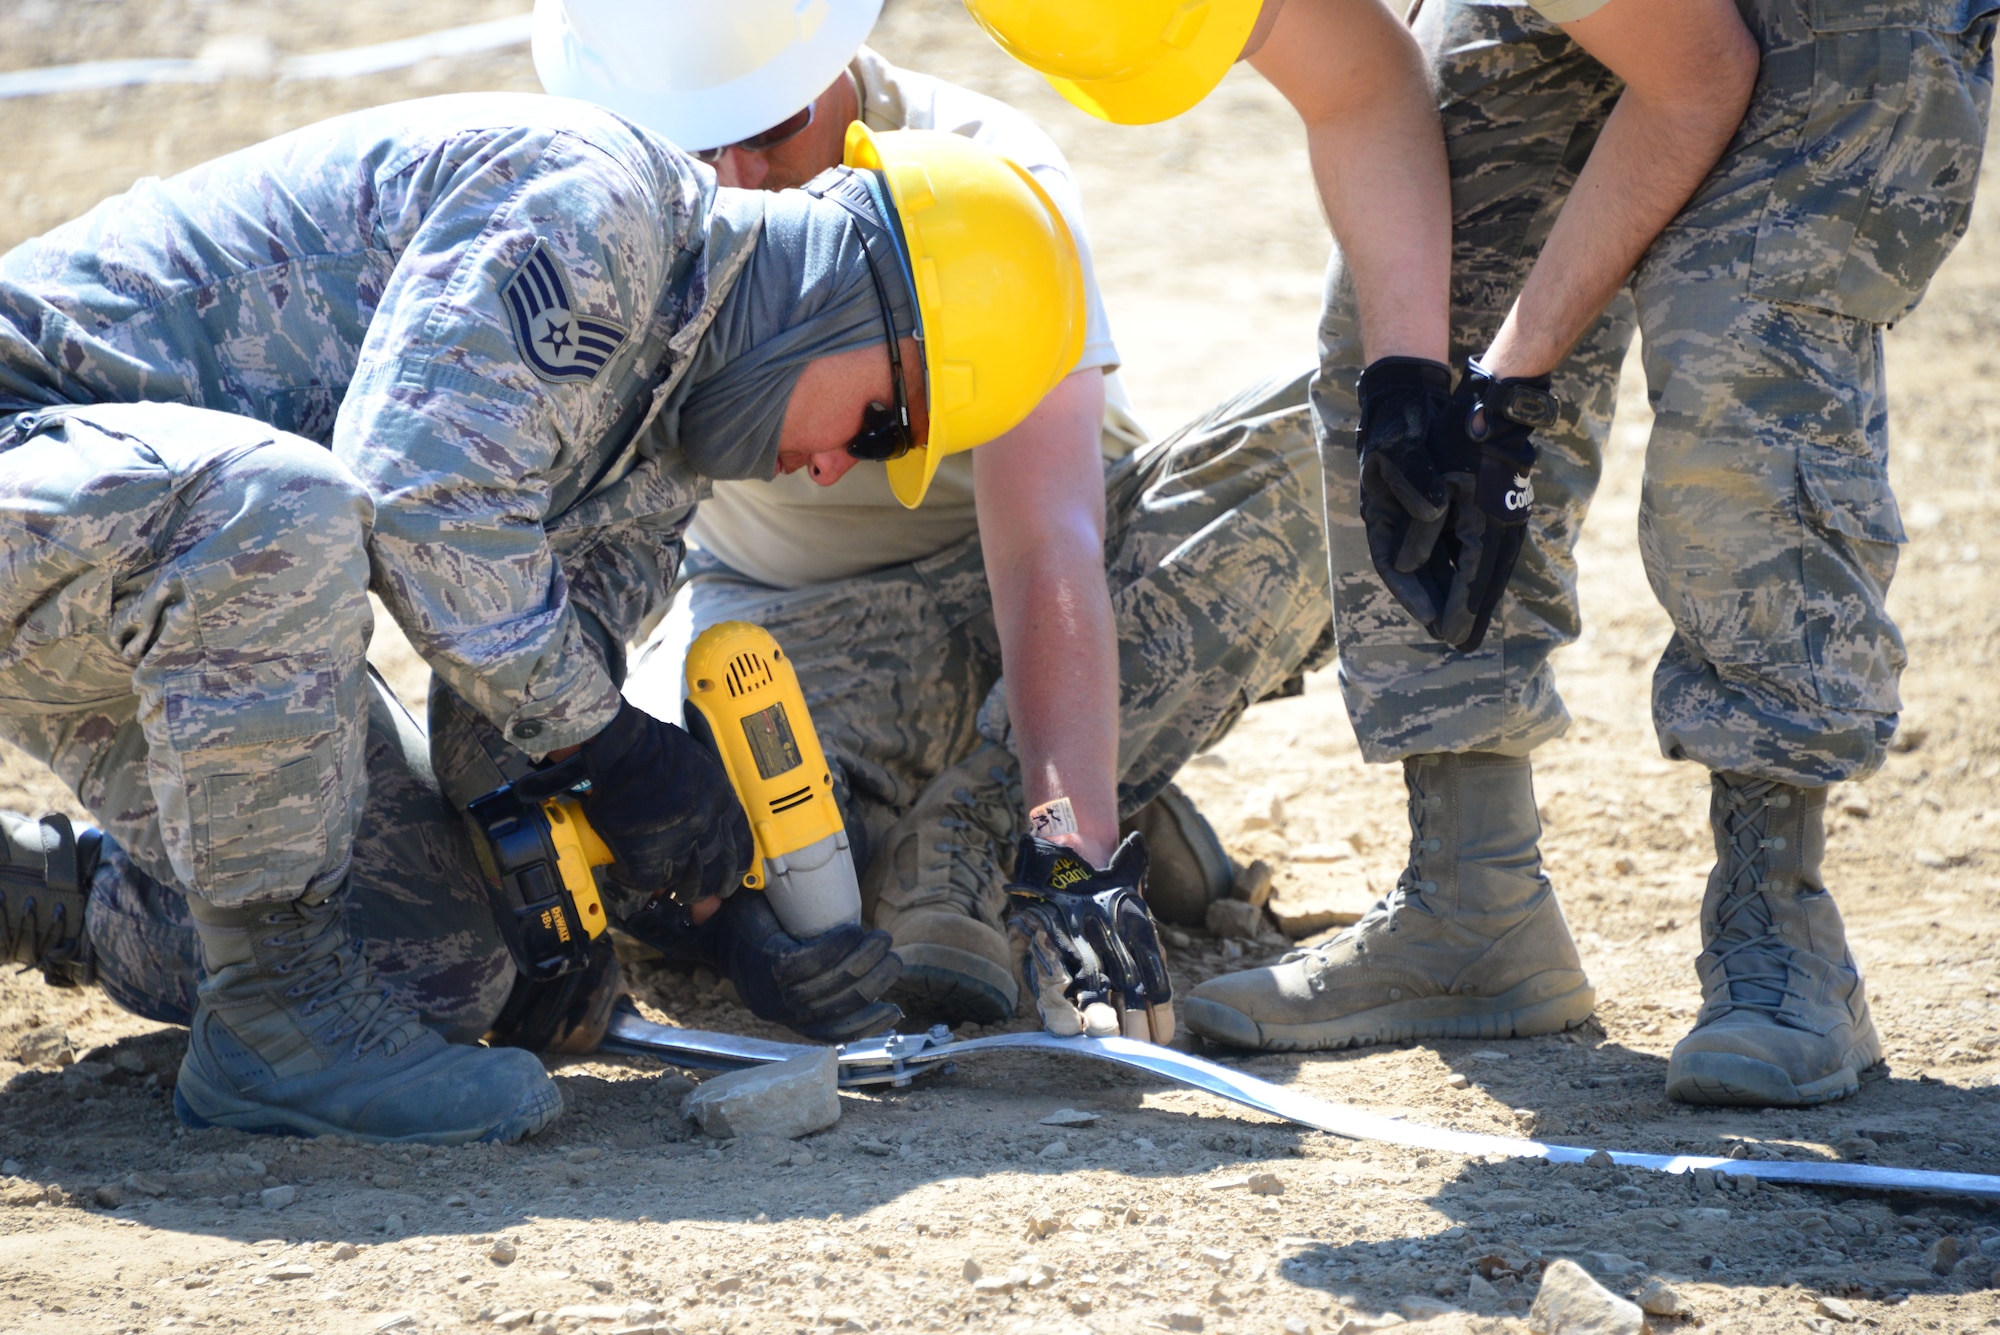 Airmen from the 118th Mission Support Group, Tennessee Air National Guard, construct lightening protection grid work for the Ammo Holding Area, better known as the AHA, Aug. 16, 2016, at Novo Selo Training Area, Bulgaria.  Tennessee National Guard Soldiers and Airmen were on rotations to complete thier portions of projects as part of Operation Resolute Castle 16, an ongoing operation of military construction to build up Eastern European base infrastructure and help strengthen ties between Tennessee's state partnership with Bulgaria. (U.S. Air National Guard photo by Master Sgt. Kendra M. Owenby, 134 ARW Public Affairs)